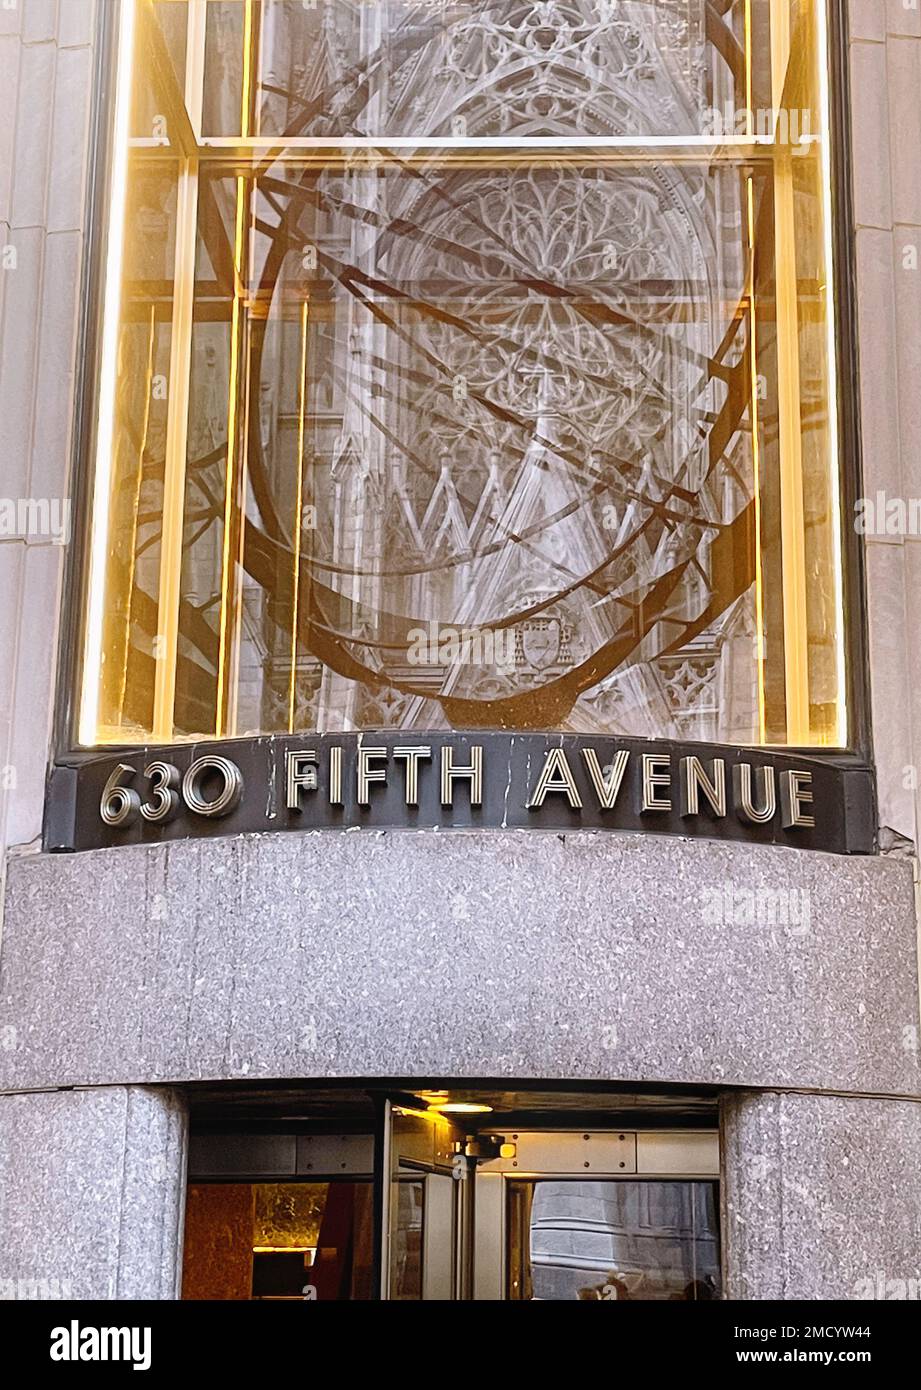 Atlas Holding the Heavens (celestial vault) Statue (armillary sphere) in Rockefeller Center and Reflected in the Window of 630 Fifth Avenue, NYC, USA Stock Photo